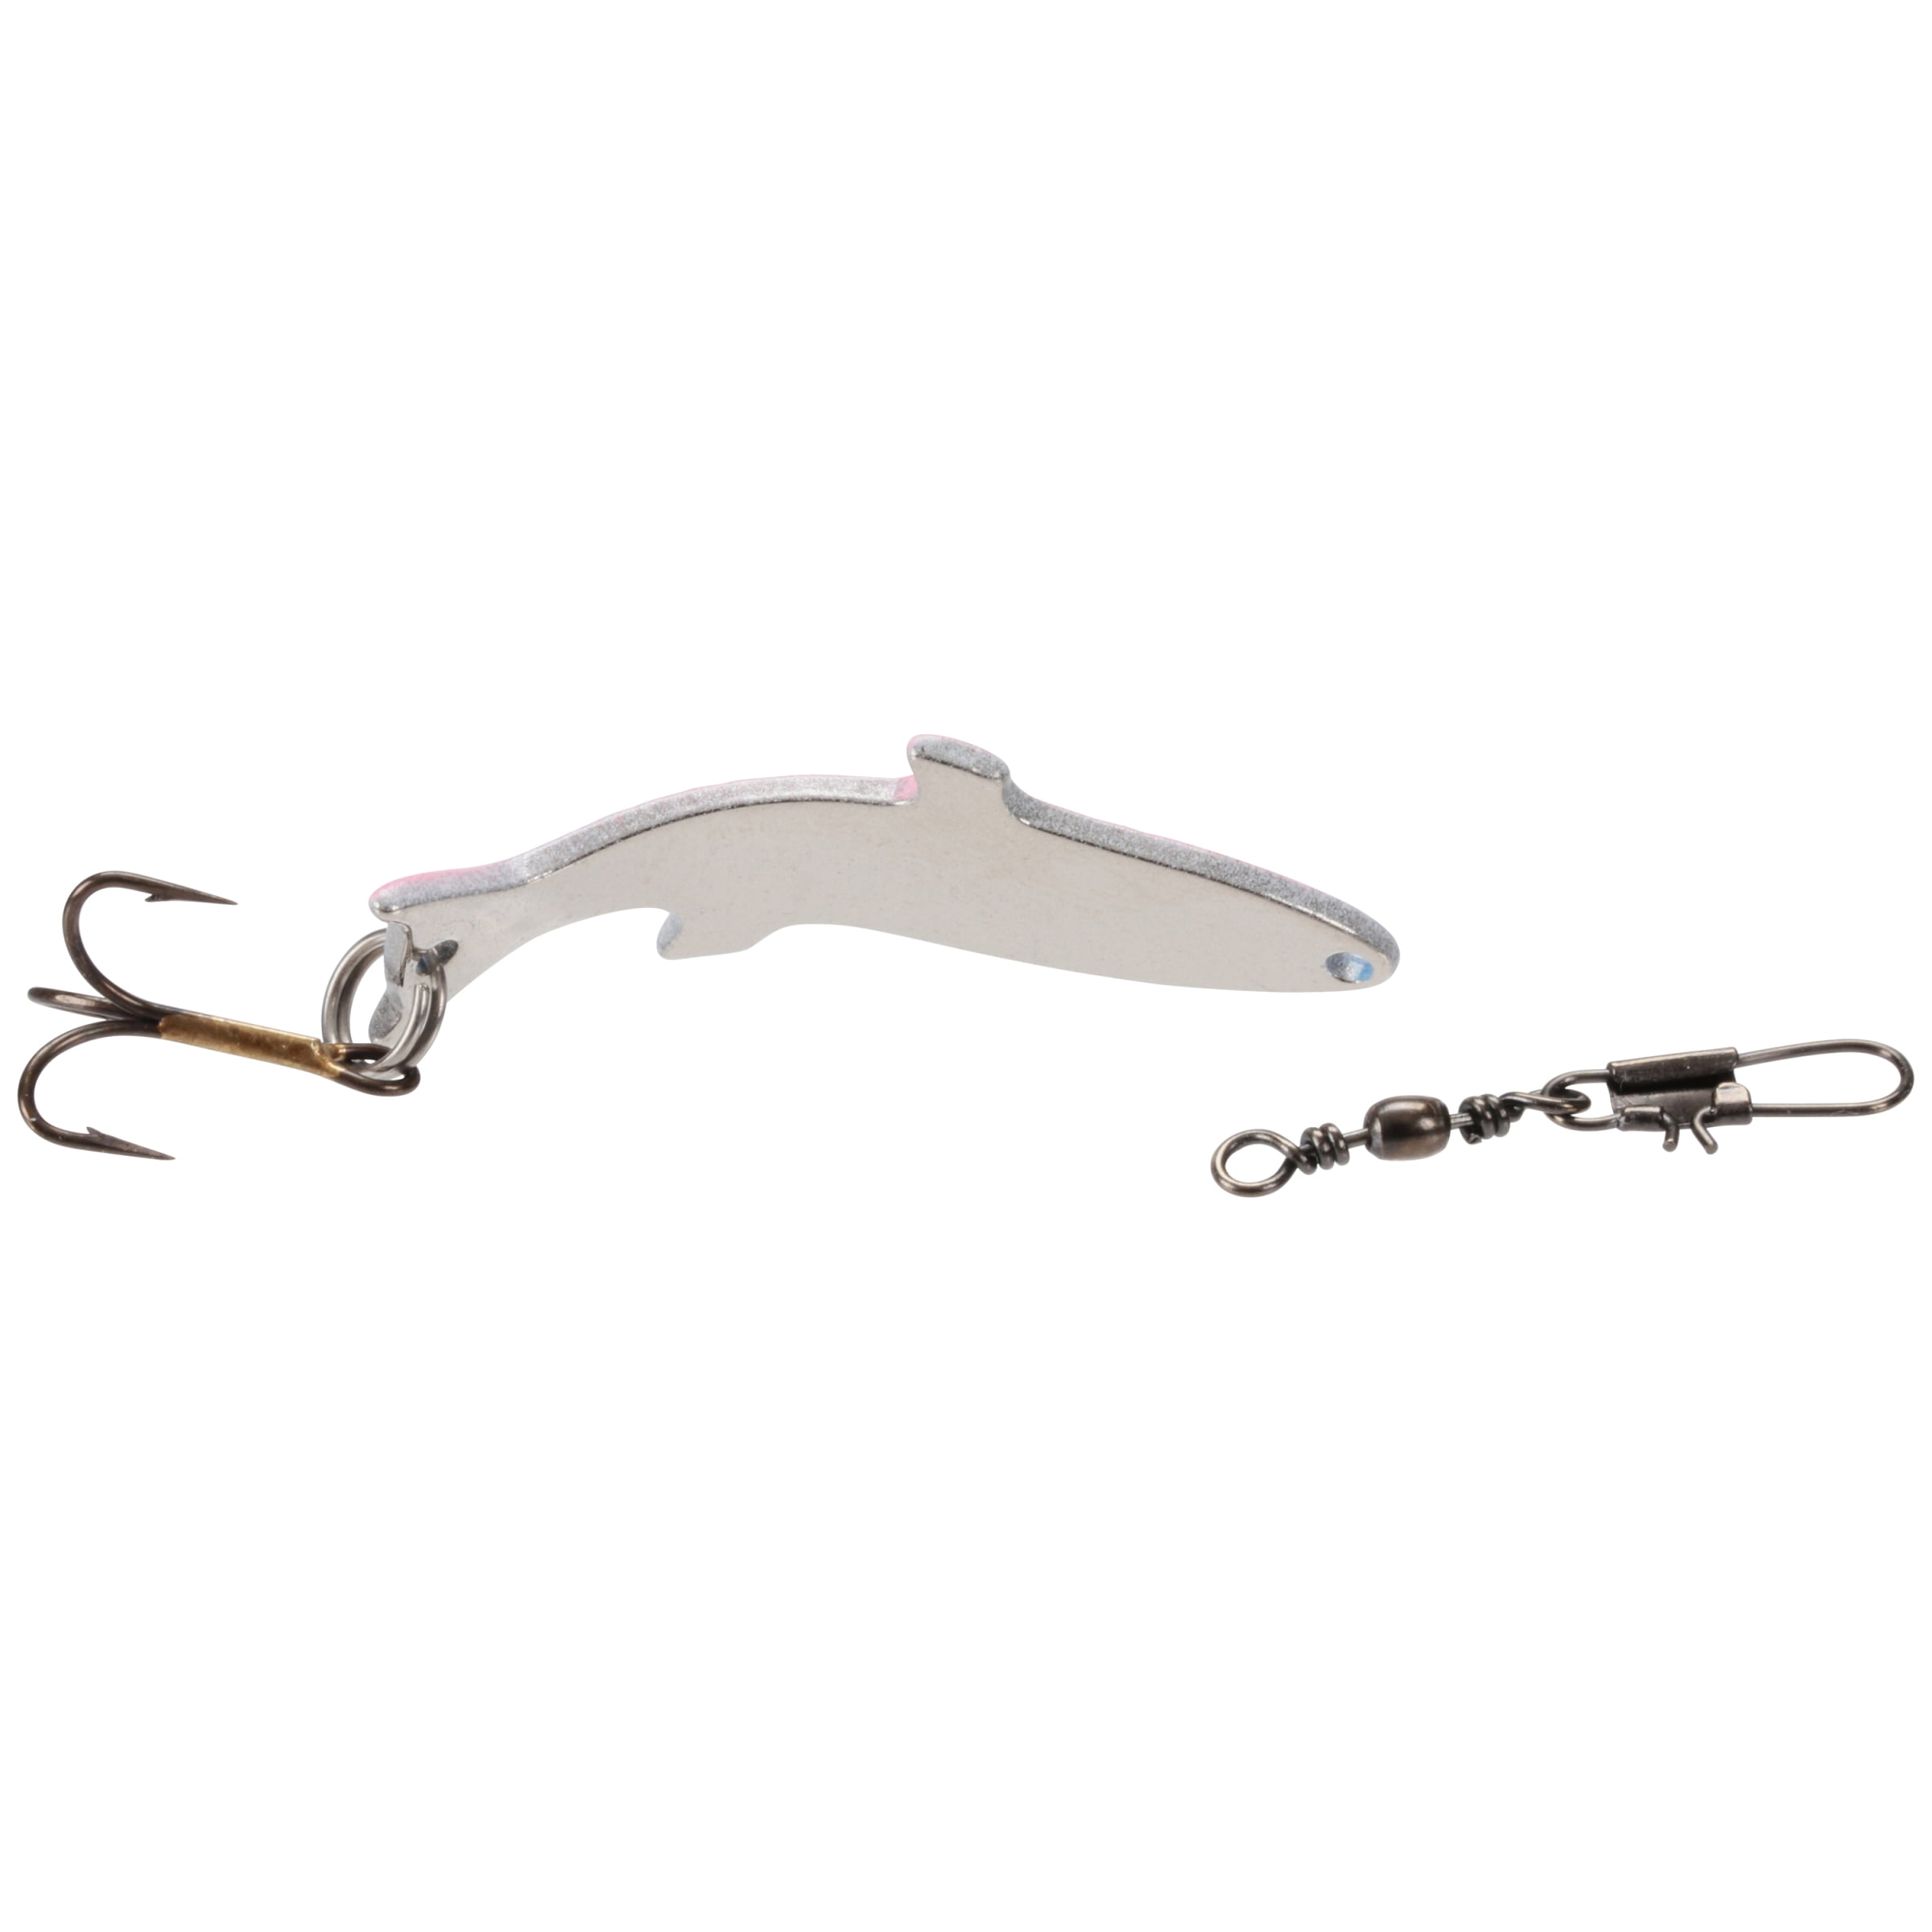 Acme Tackle Phoebe Fishing Lure Spoon Rainbow Trout 1/12 oz. 